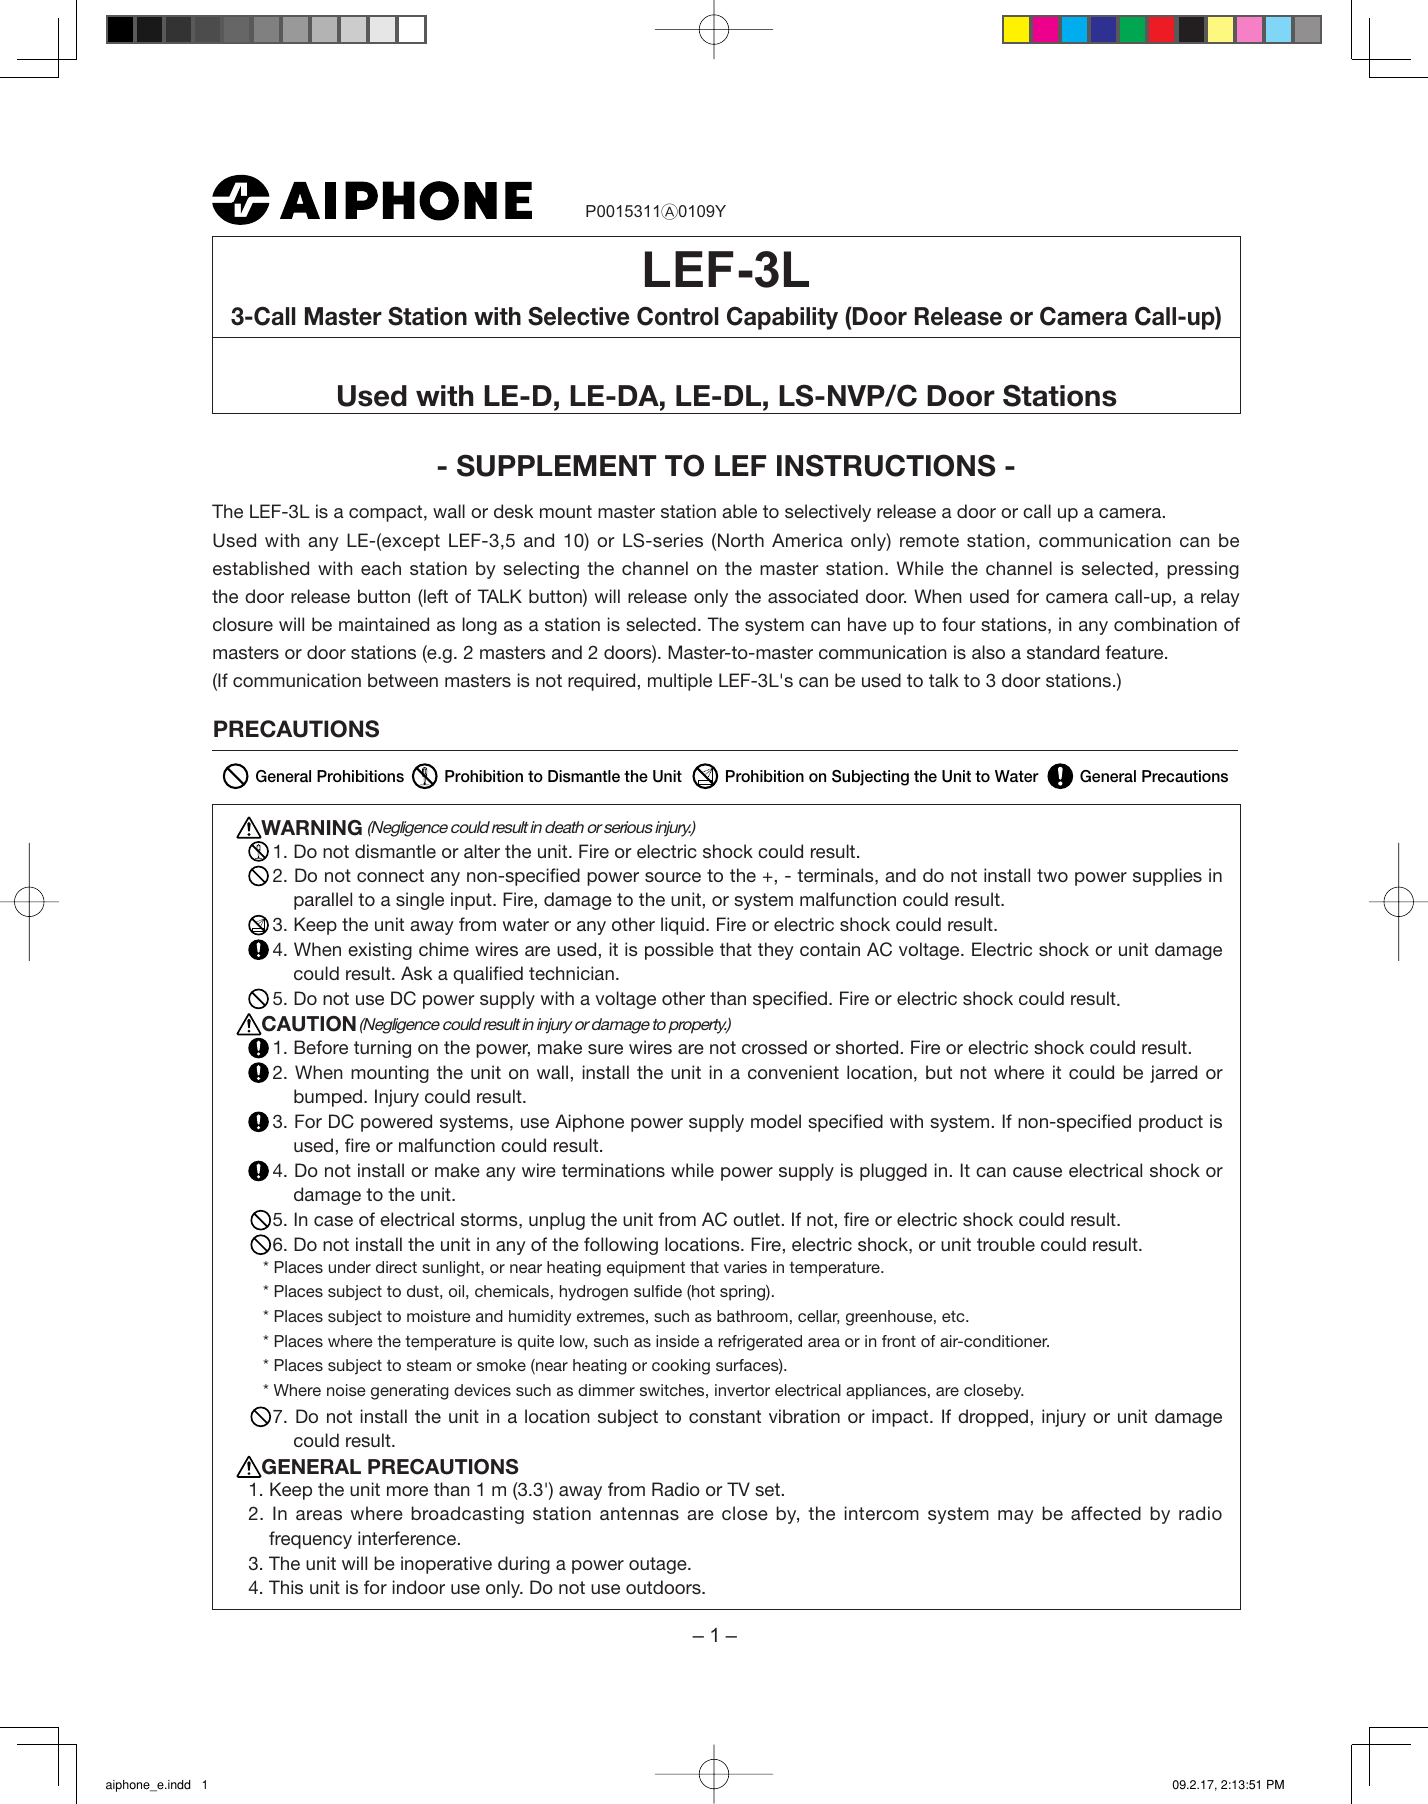 Page 1 of 12 - Aiphone Aiphone-Lef-3L-Users-Manual- Aiphone_e  Aiphone-lef-3l-users-manual